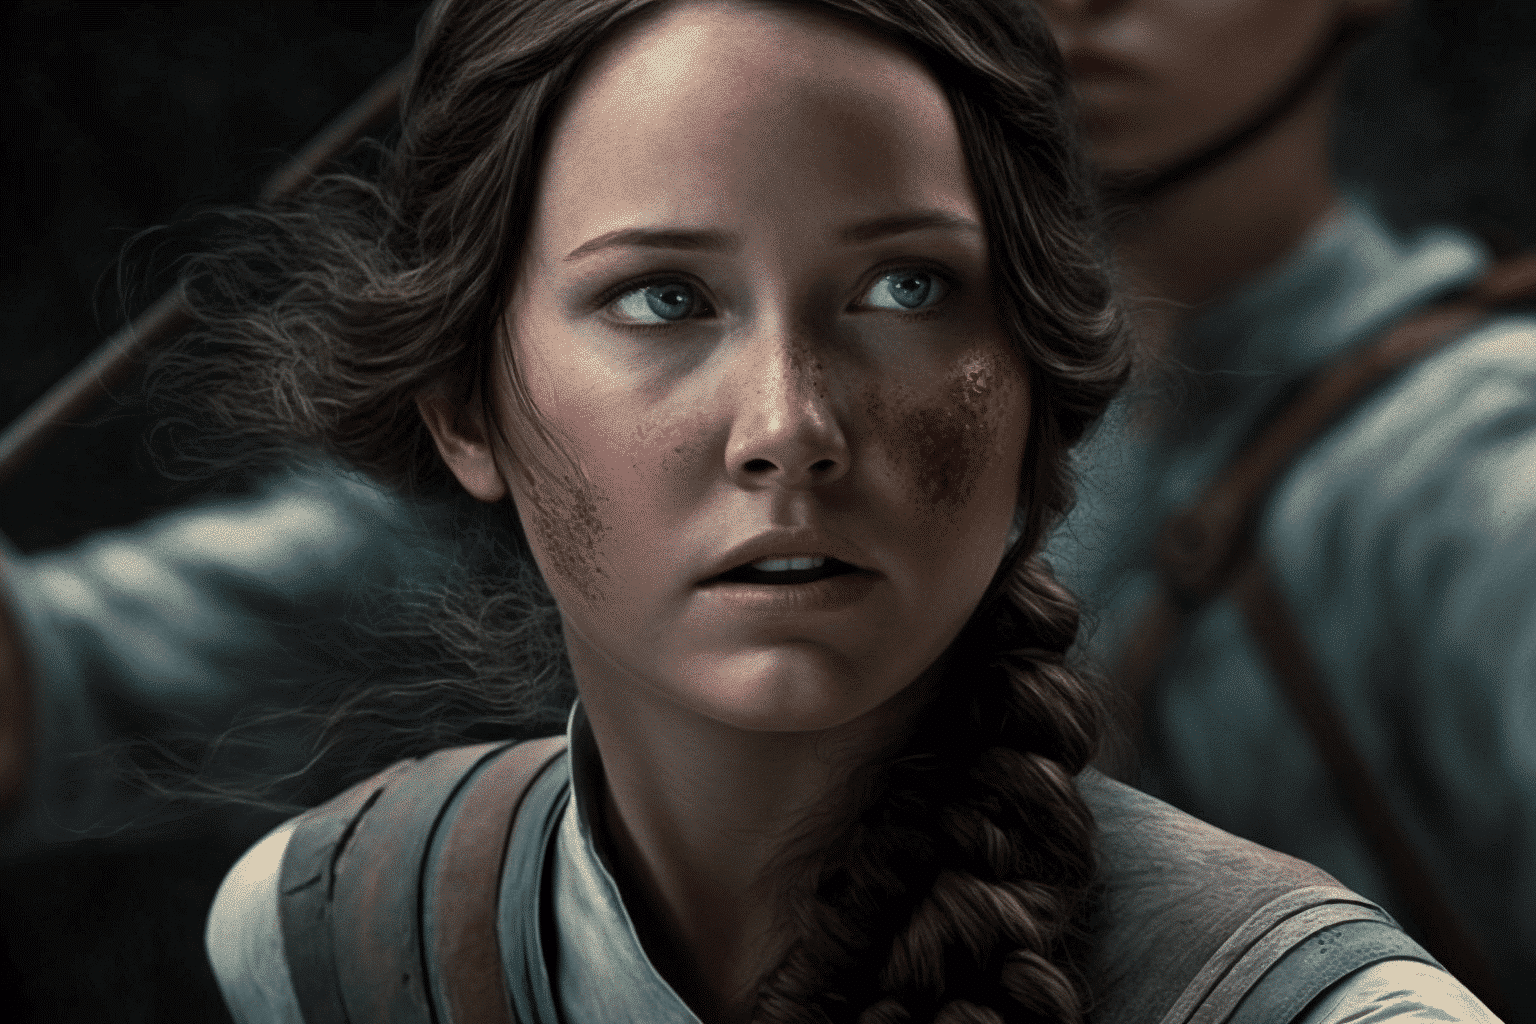 unveiling-details-on-the-upcoming-'hunger-games'-prequel-film